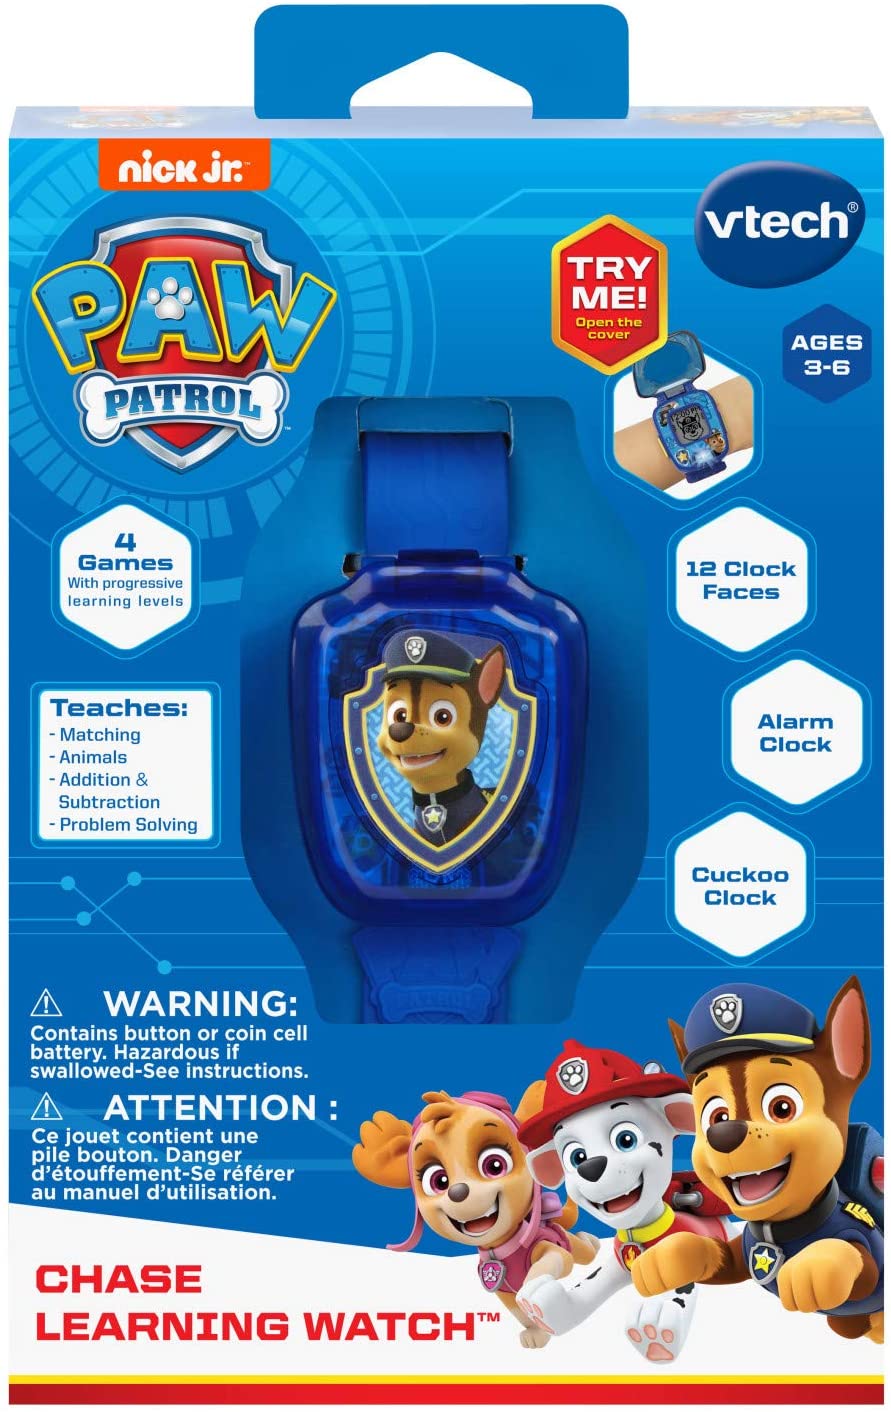 VTech PAW Patrol Chase Learning Watch, Blue - for Ages 3-6 years